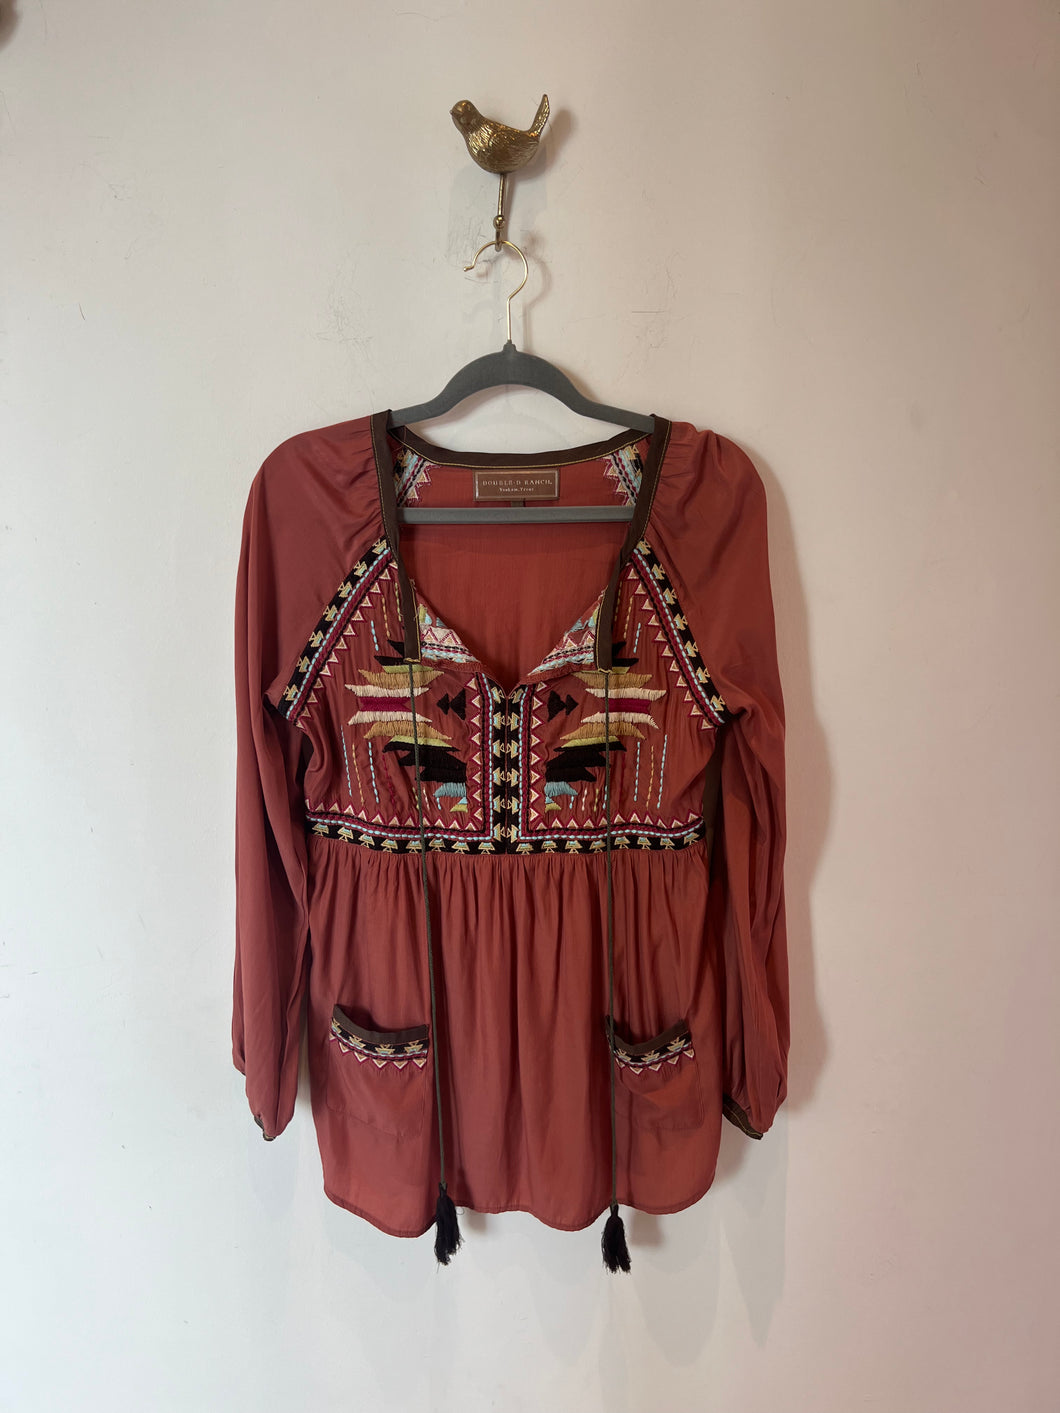 Double D Ranch Rust Embroidered Dress - XS